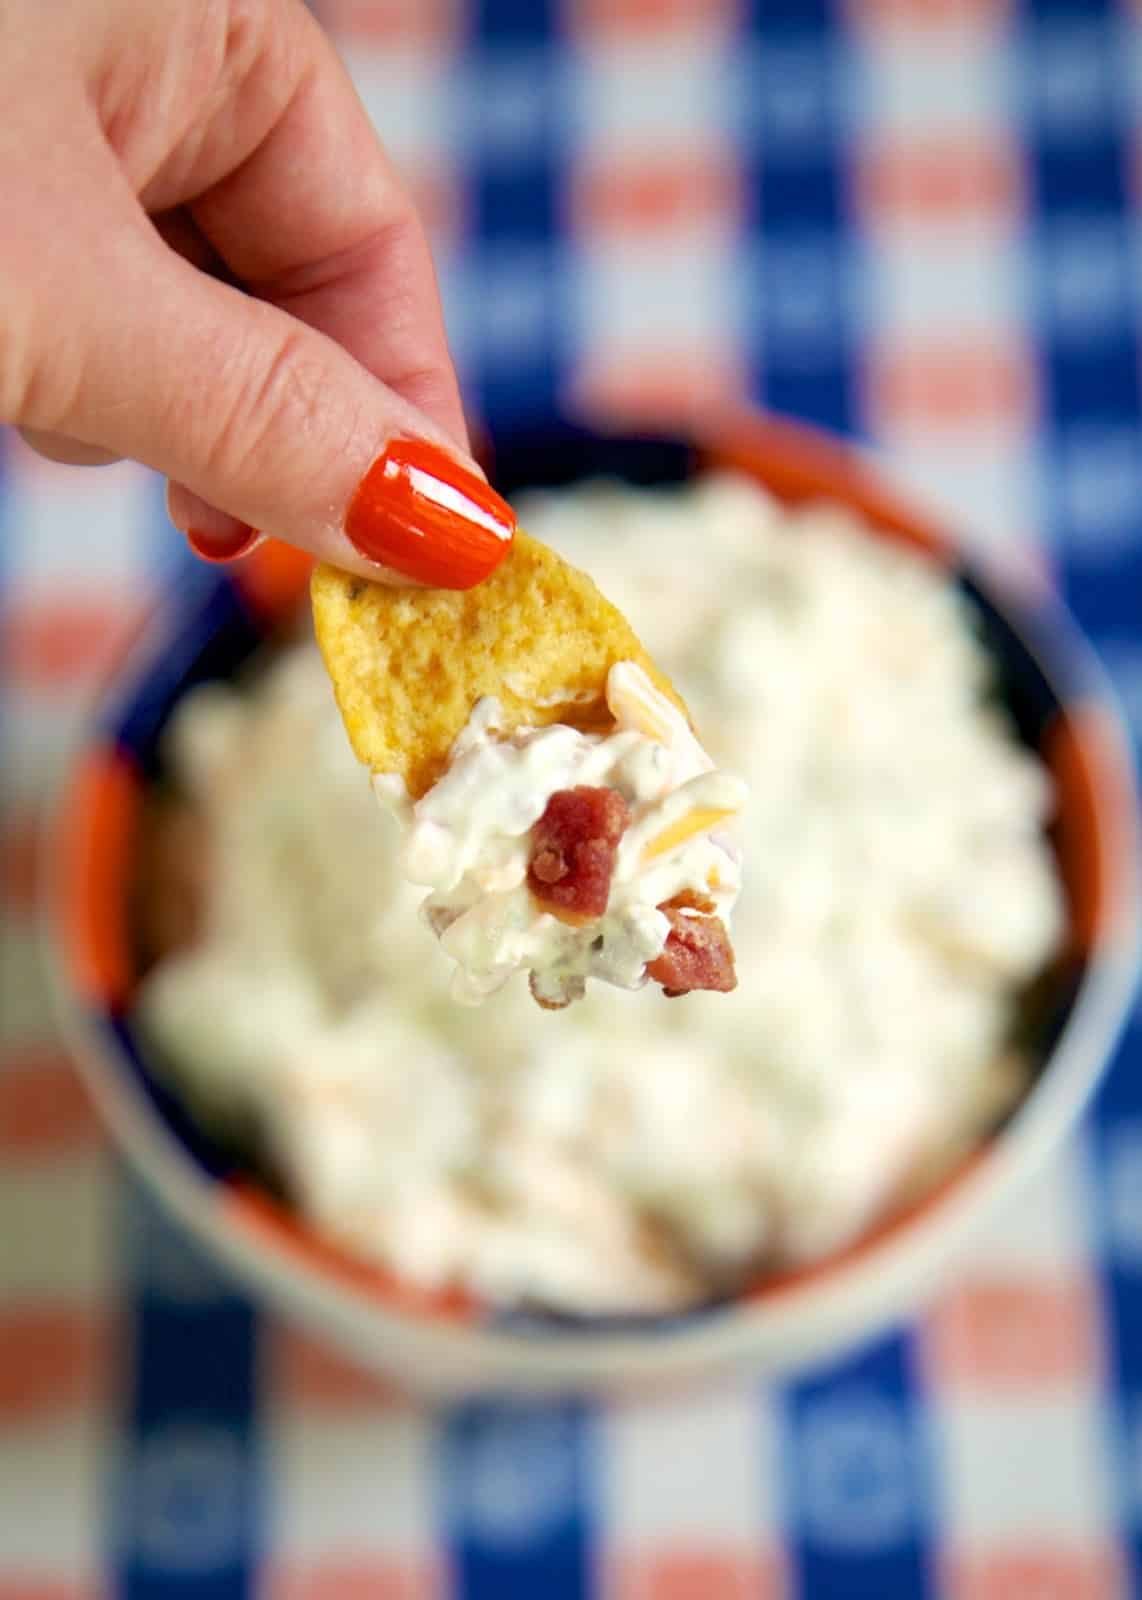 Crack Dip - Cheddar Bacon Ranch Dip - HIGHLY addictive! We take this to every tailgate and there is never any left. Double the recipe, it goes fast!